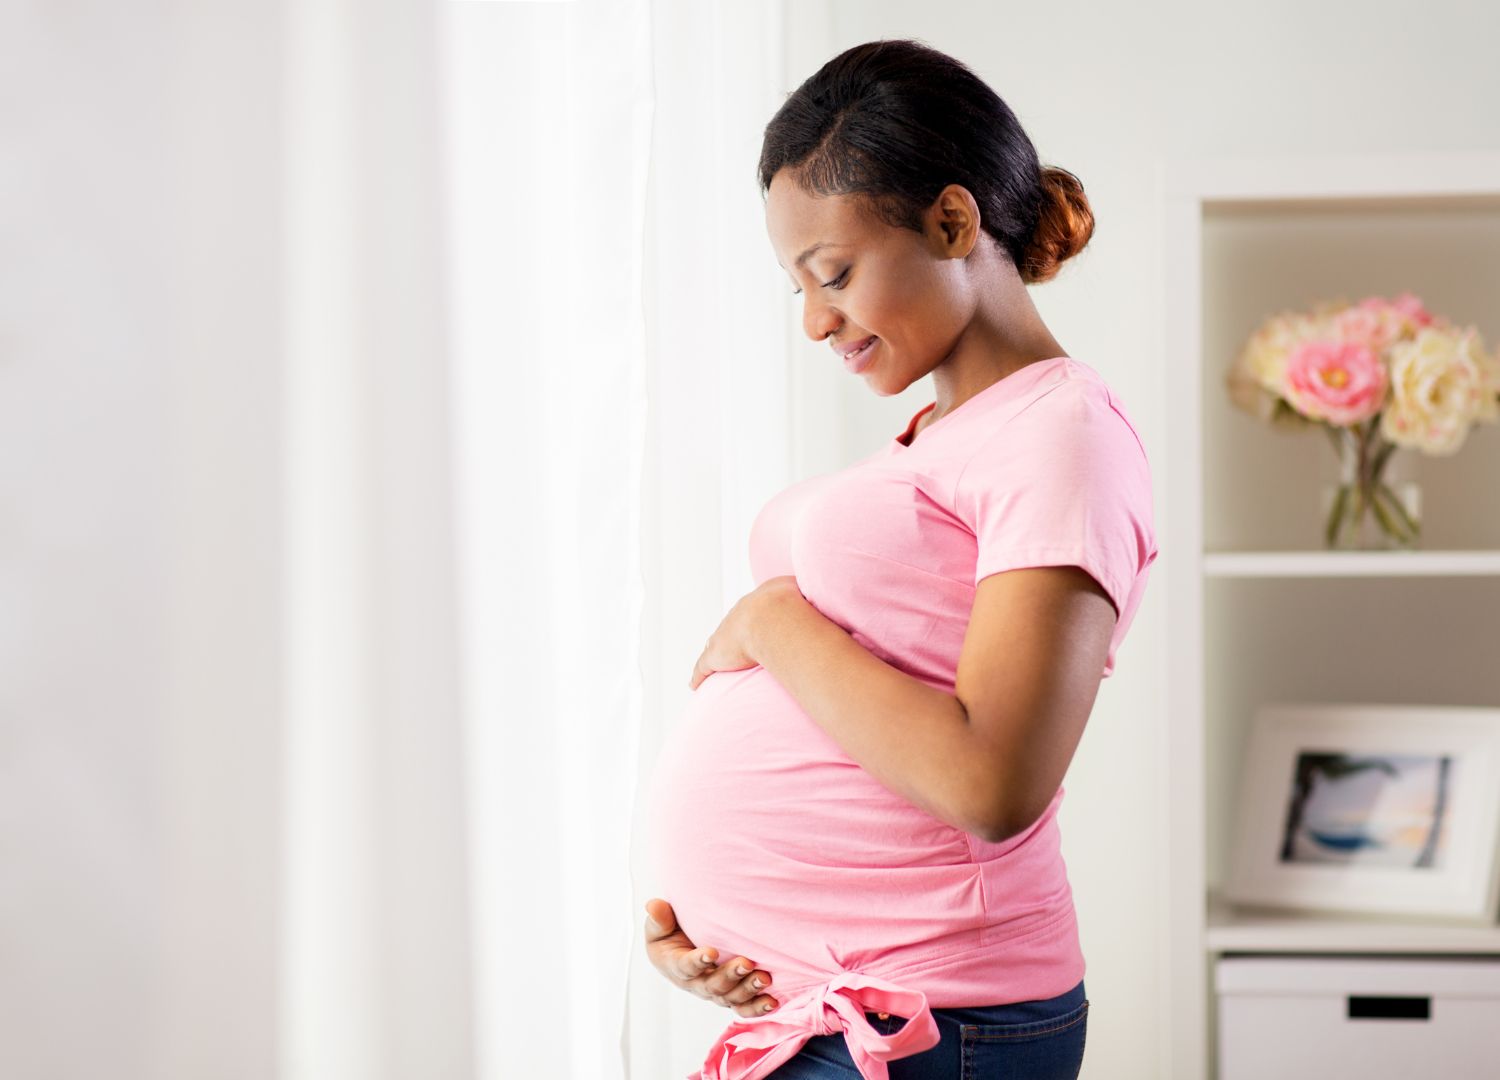 "Five Common Myths about Pregnancy  You’ve Believed as Facts"